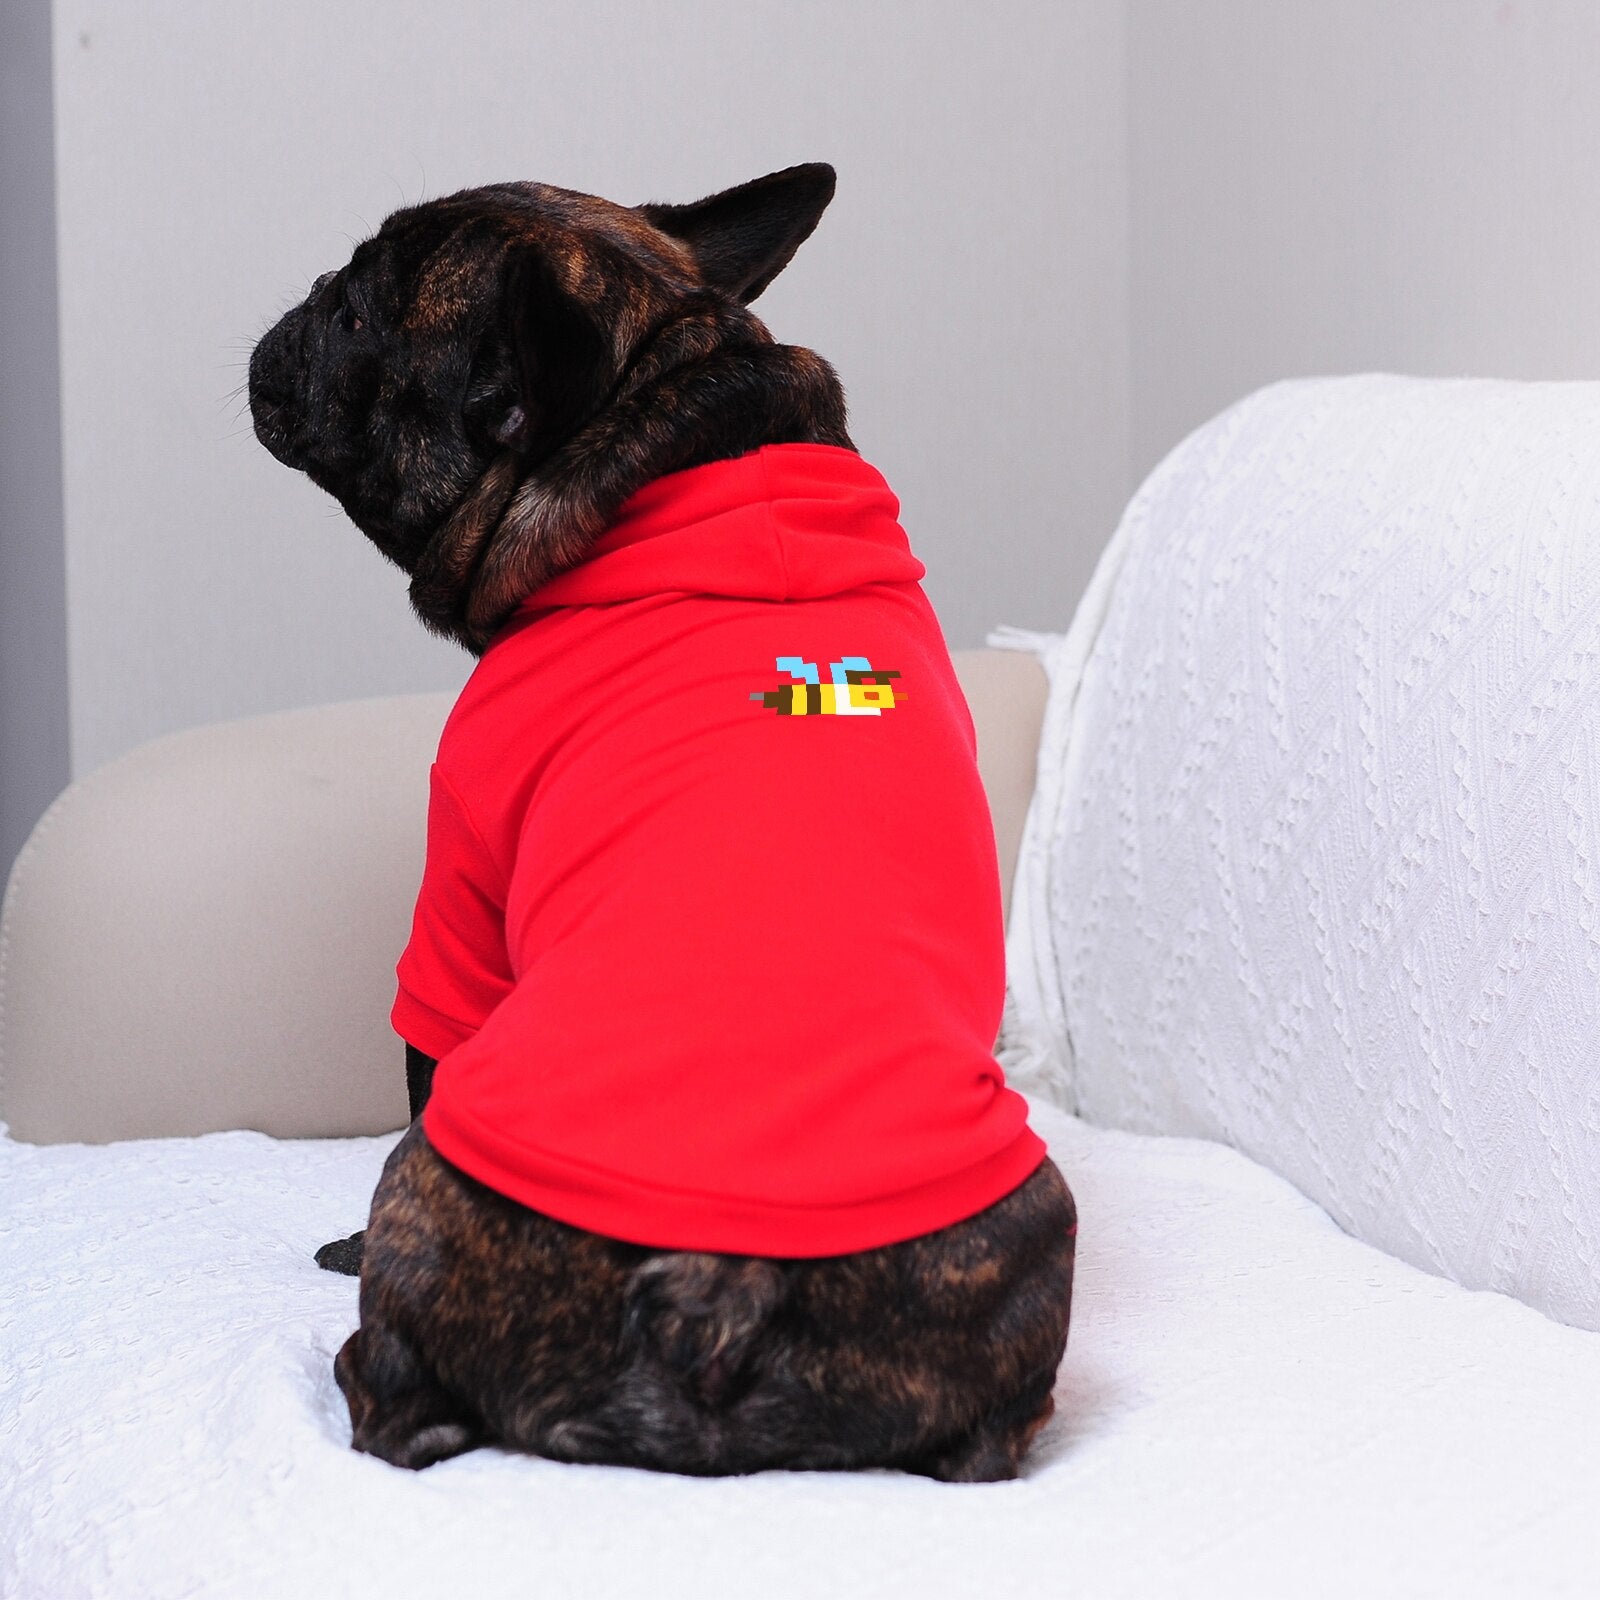 Pet Clothes Hoodies for Dogs Cats in Small Medium Big Large Size with Leash Hole Soft Cotton Fabric Good Quality 2022 New